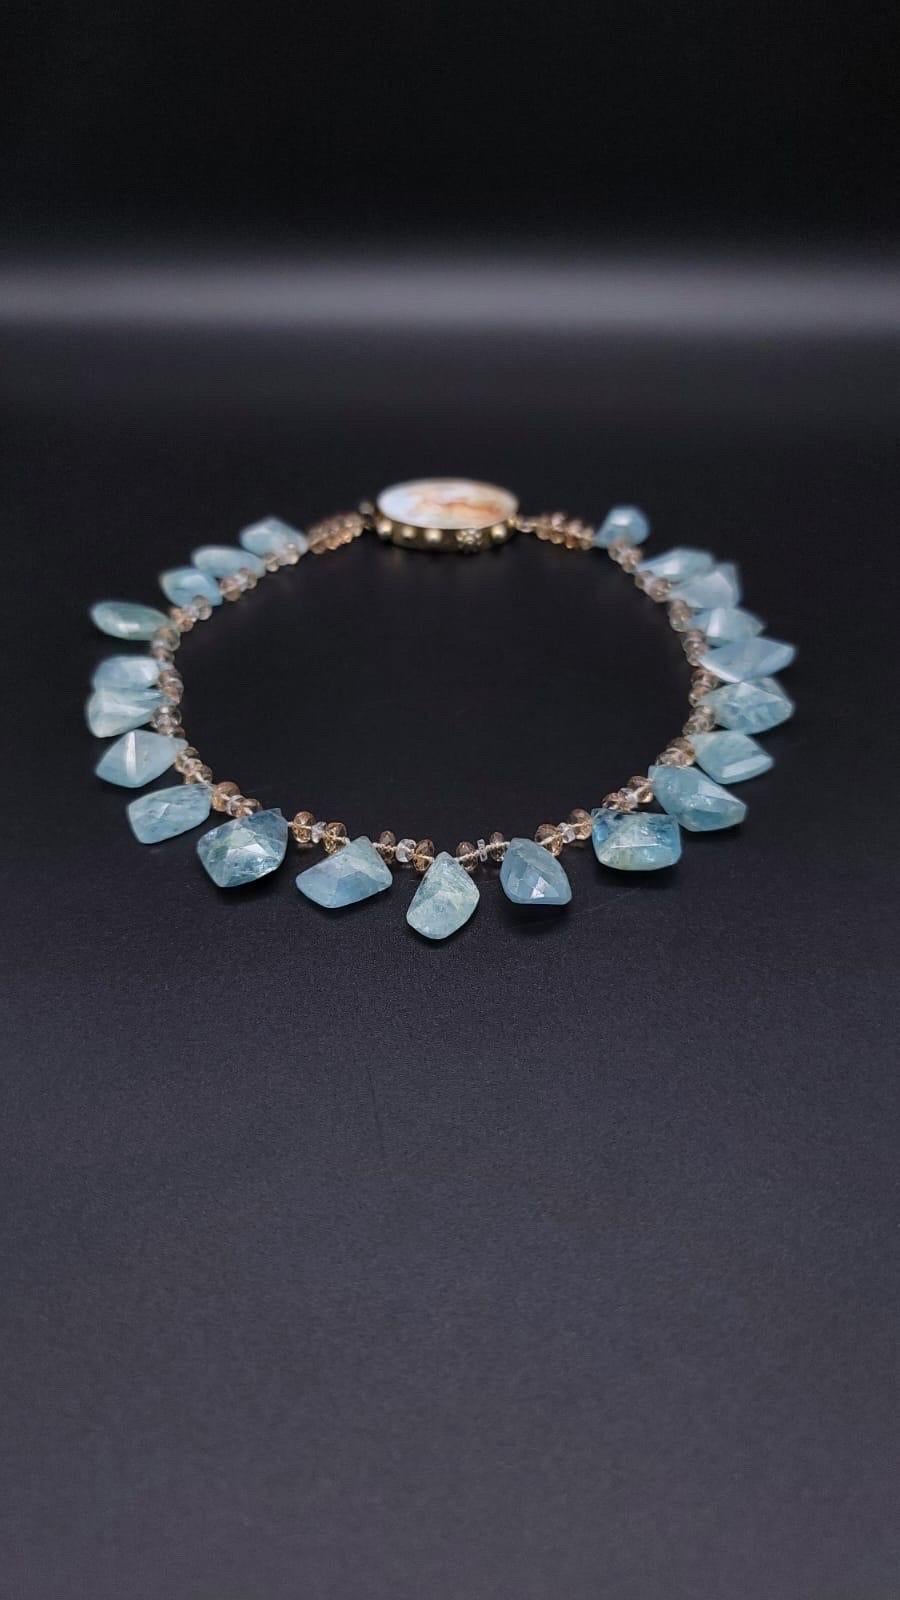 A.Jeschel Aquamarine and Swarovski Crystal richly mixed in a flattering necklace For Sale 10